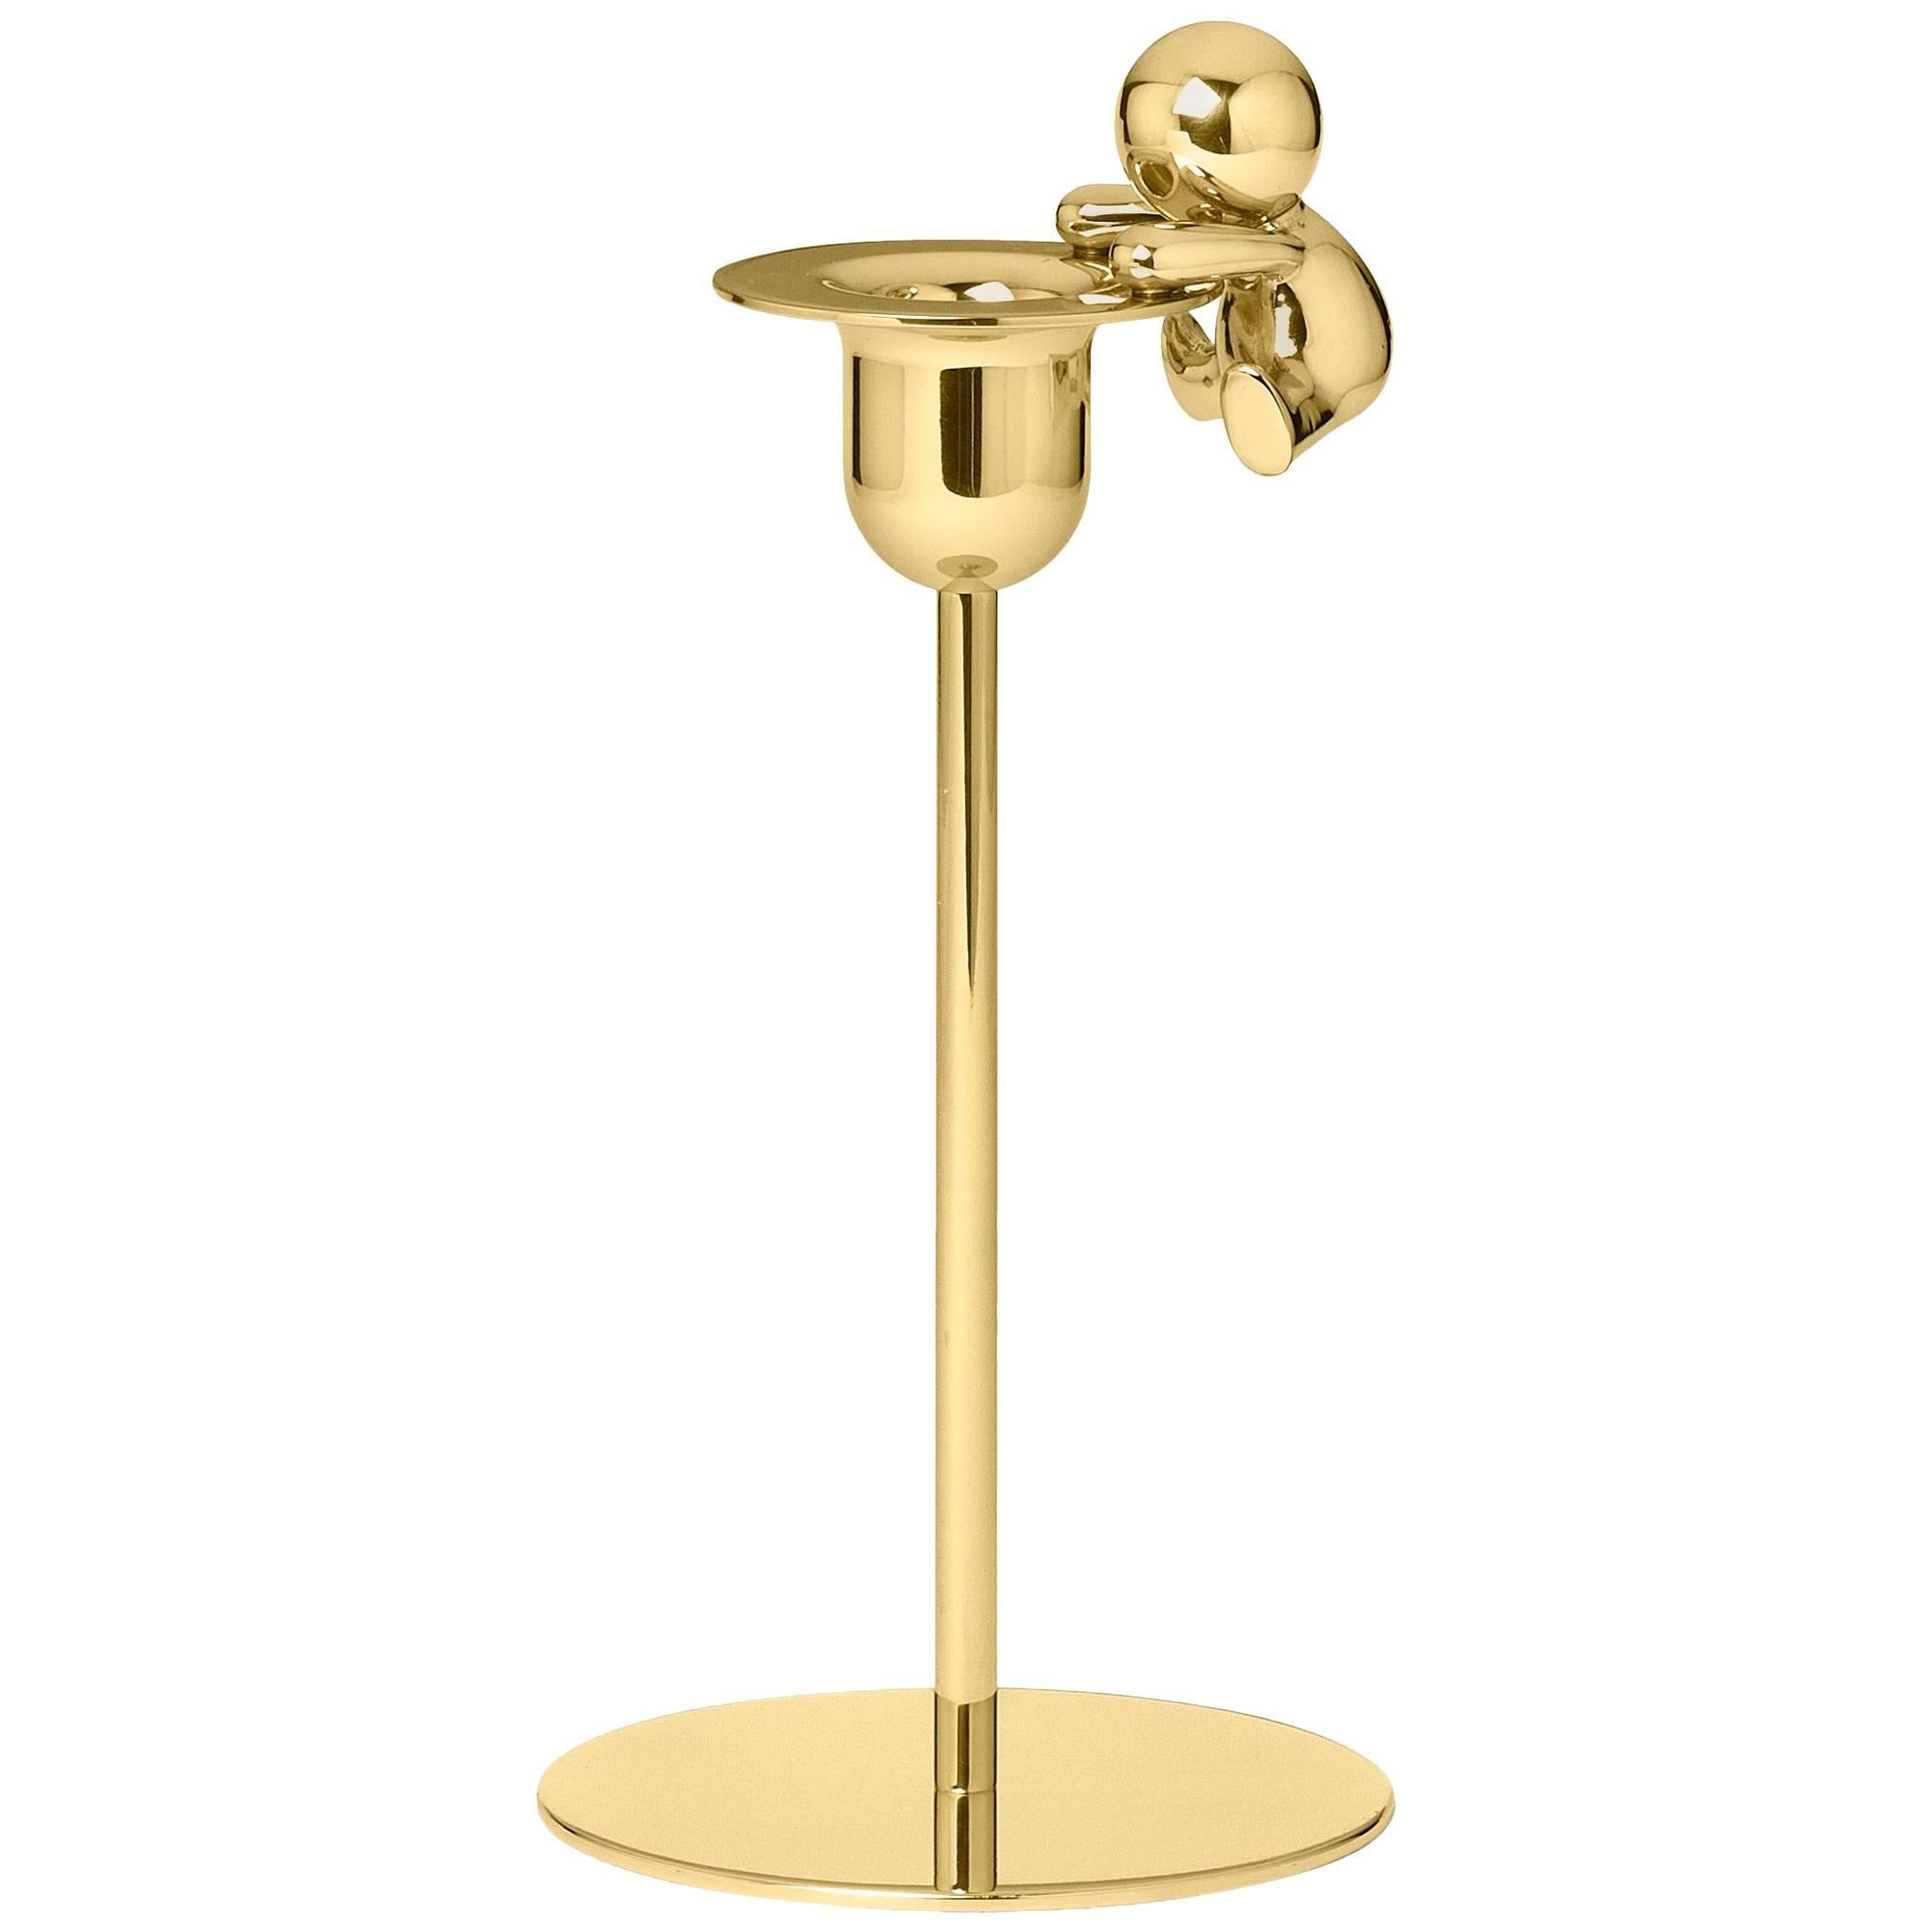 Ghidini 1961 Omini the Climber Short Candlestick in Polished Brass For Sale